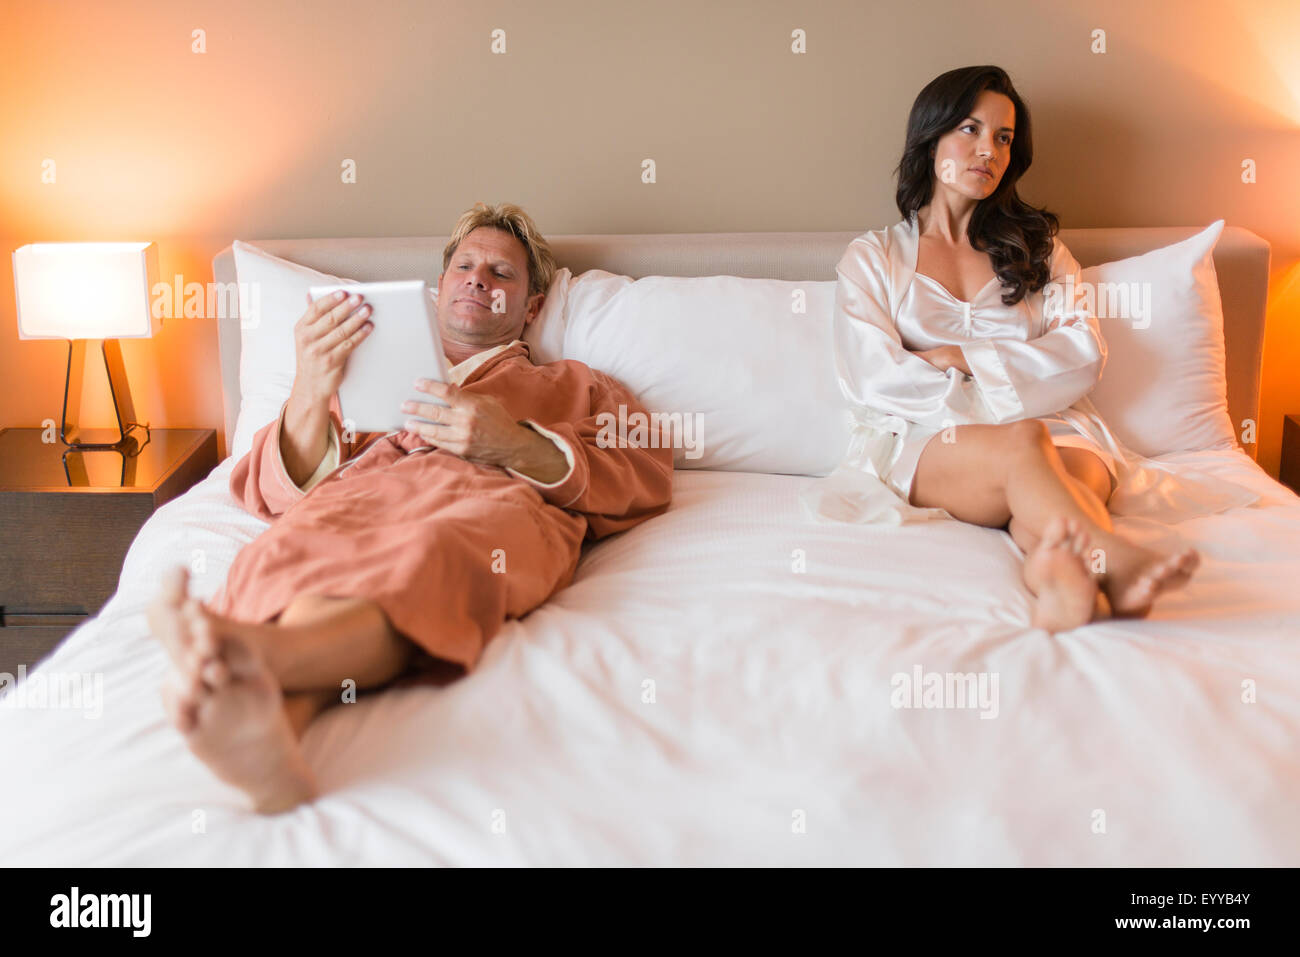 Man with digital tablet ignoring girlfriend in bed Stock Photo